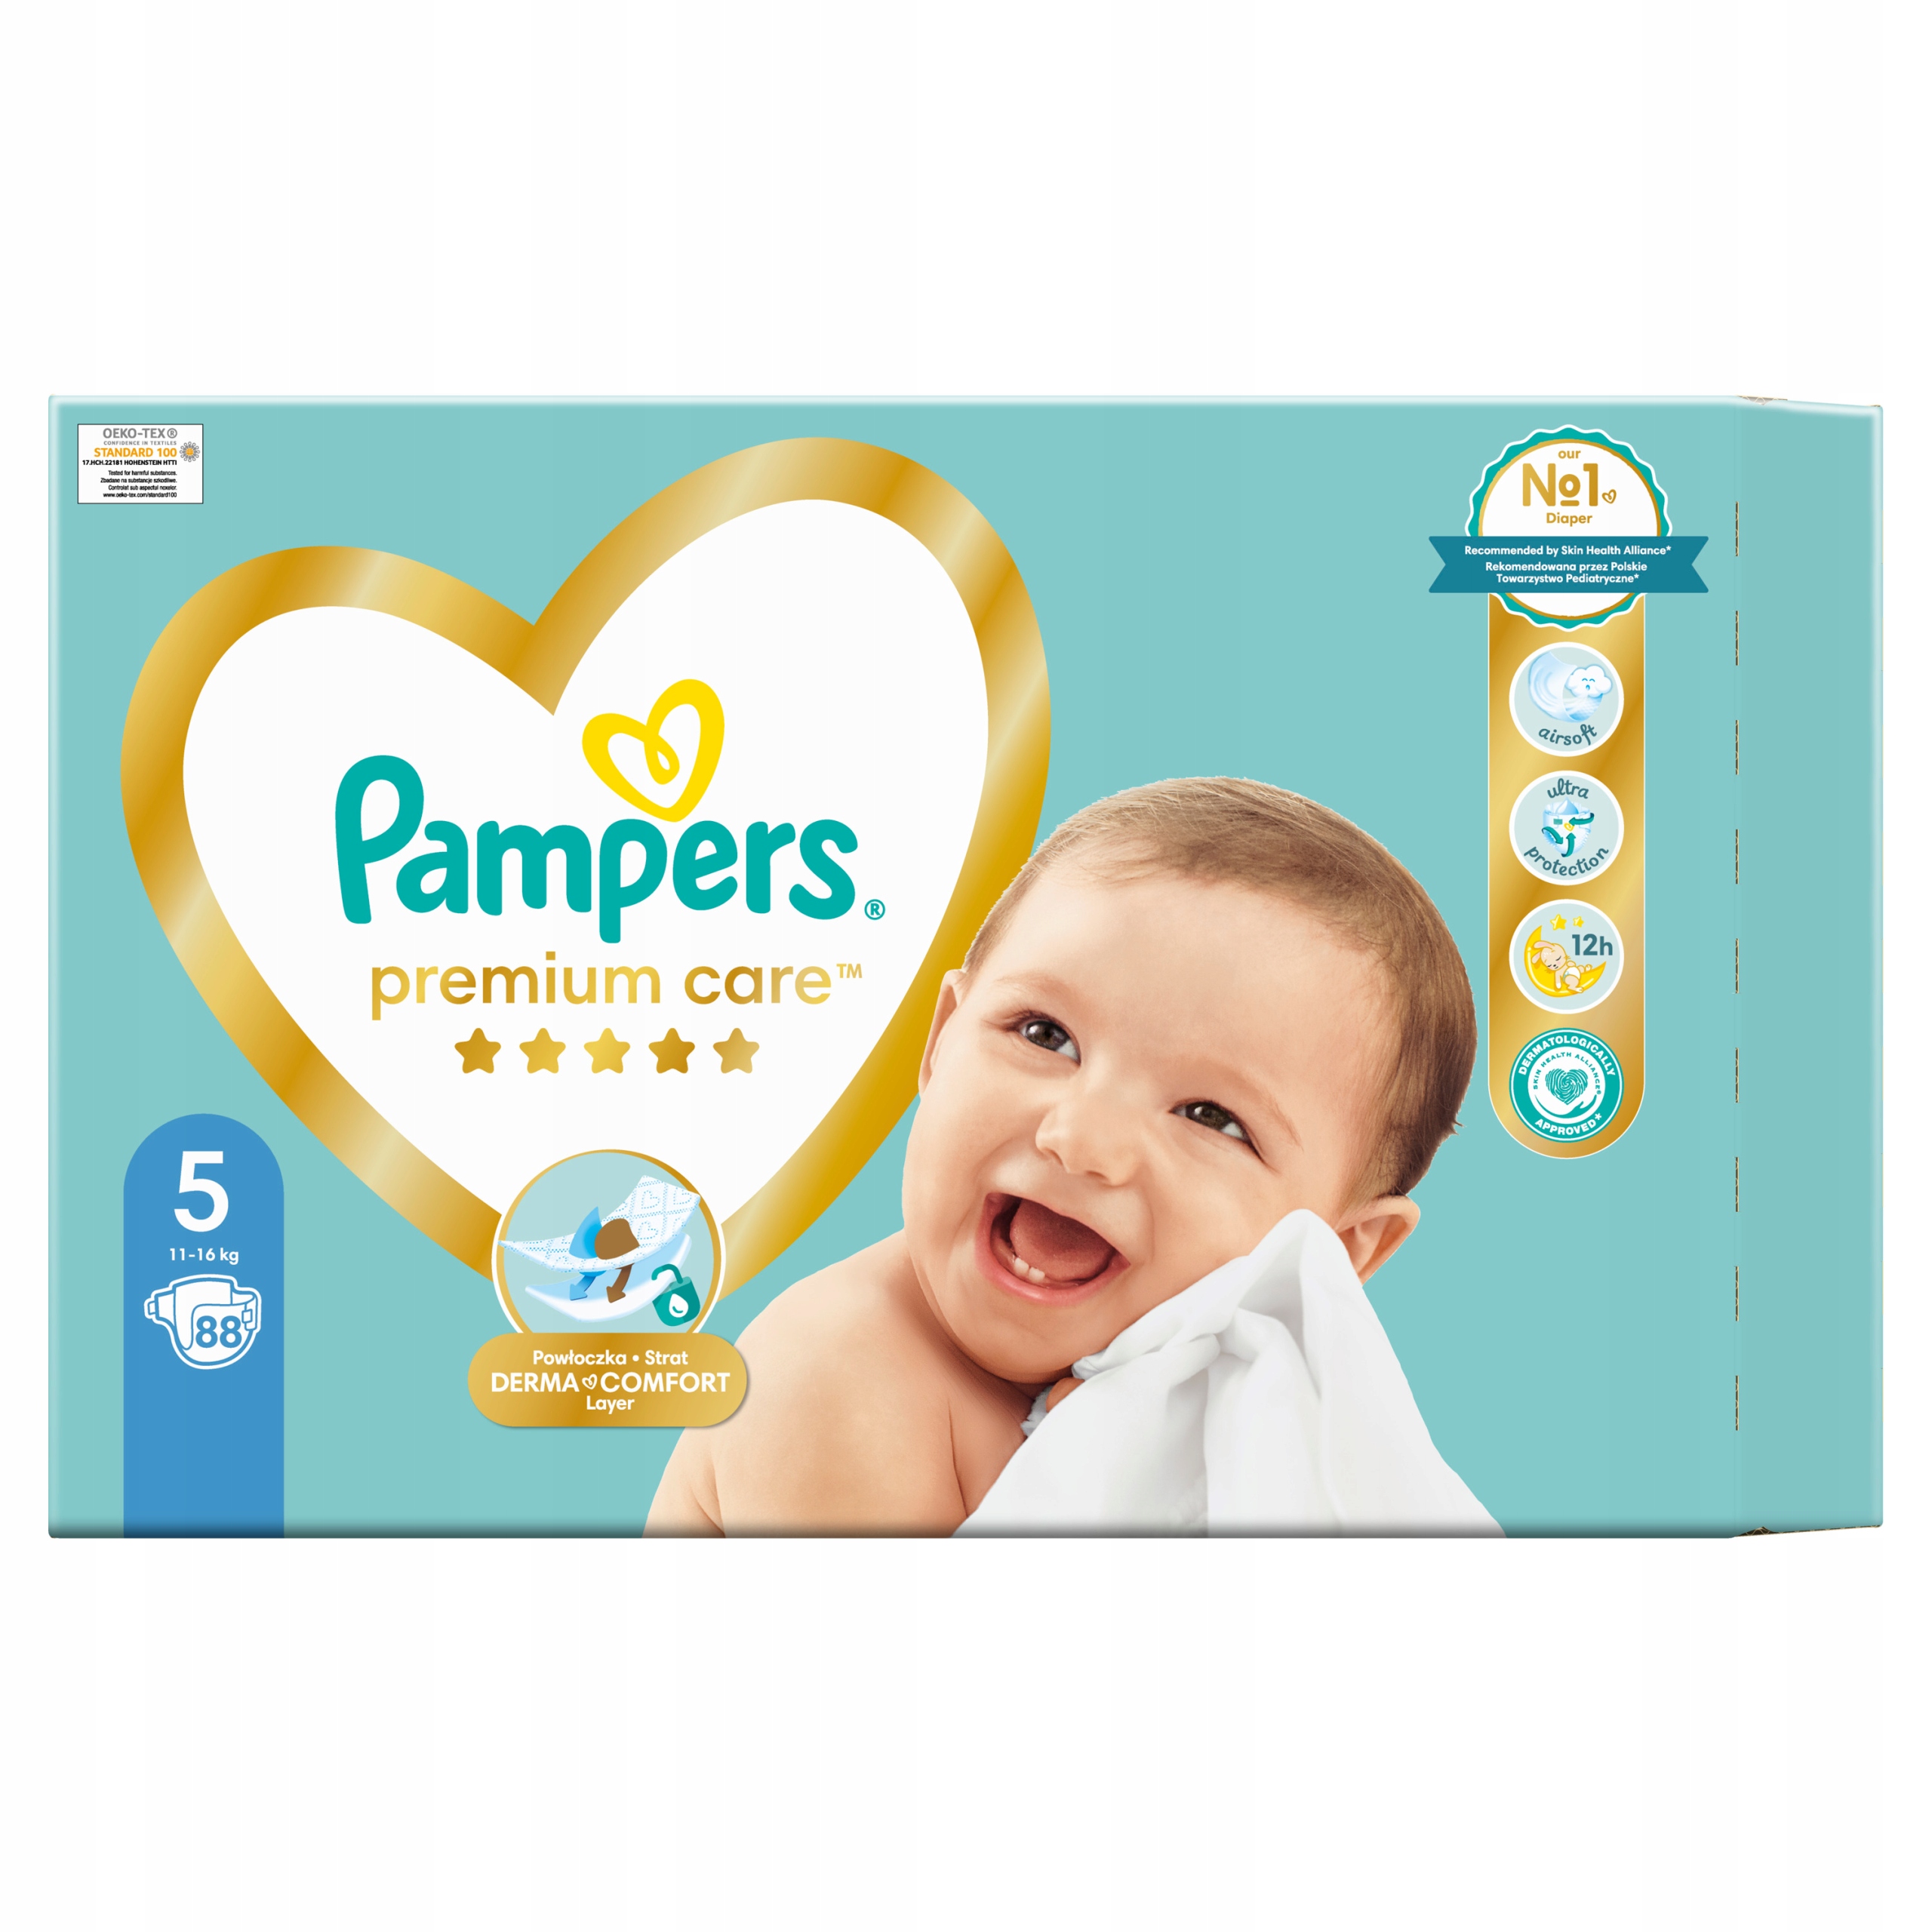 pampers active baby 3 52 szt